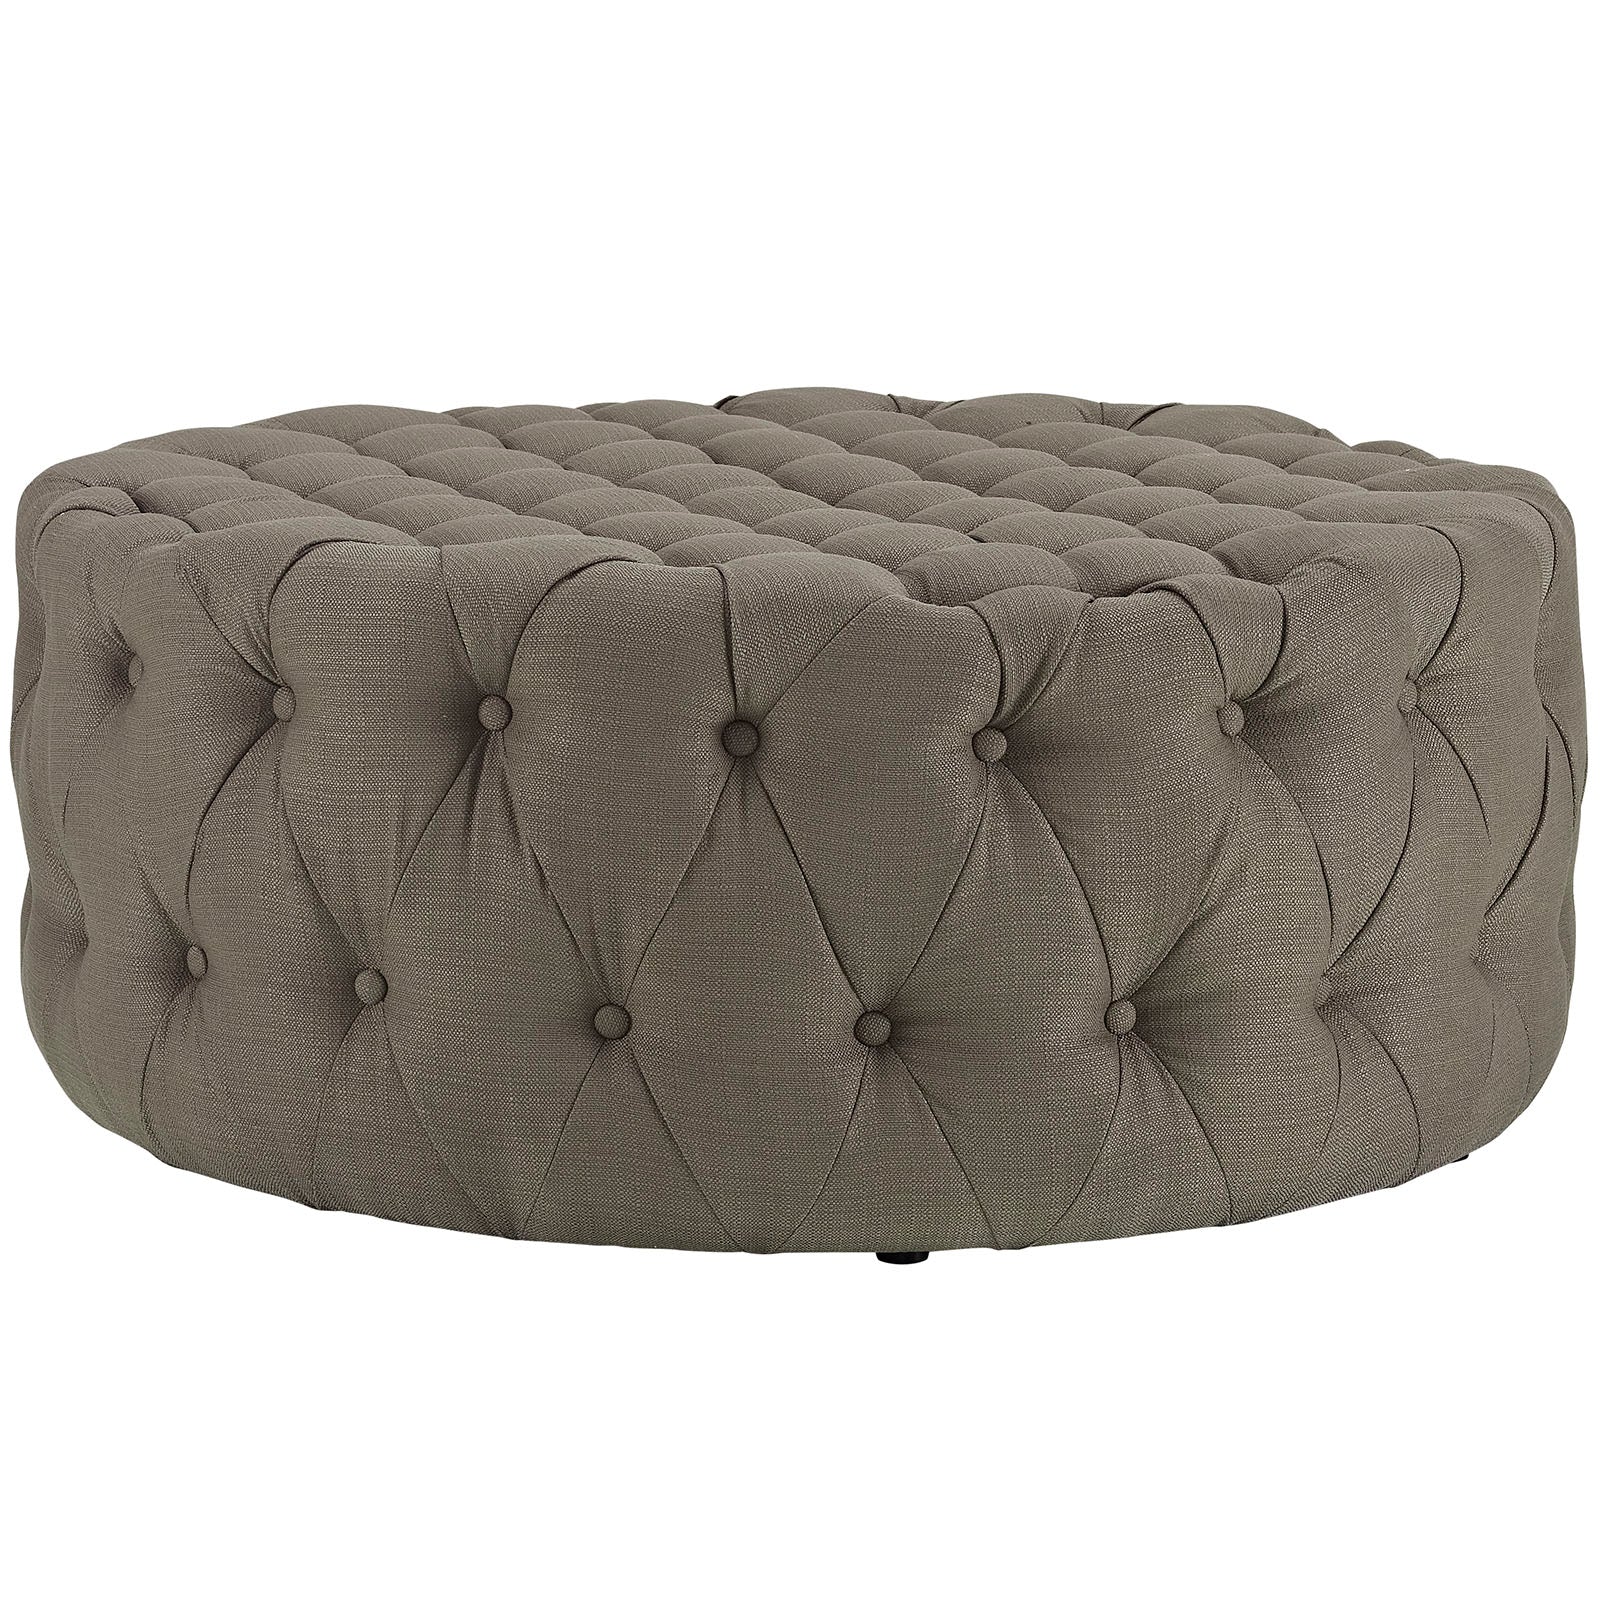 Modway Ottomans & Stools - Amour Upholstered Fabric Ottoman Granite